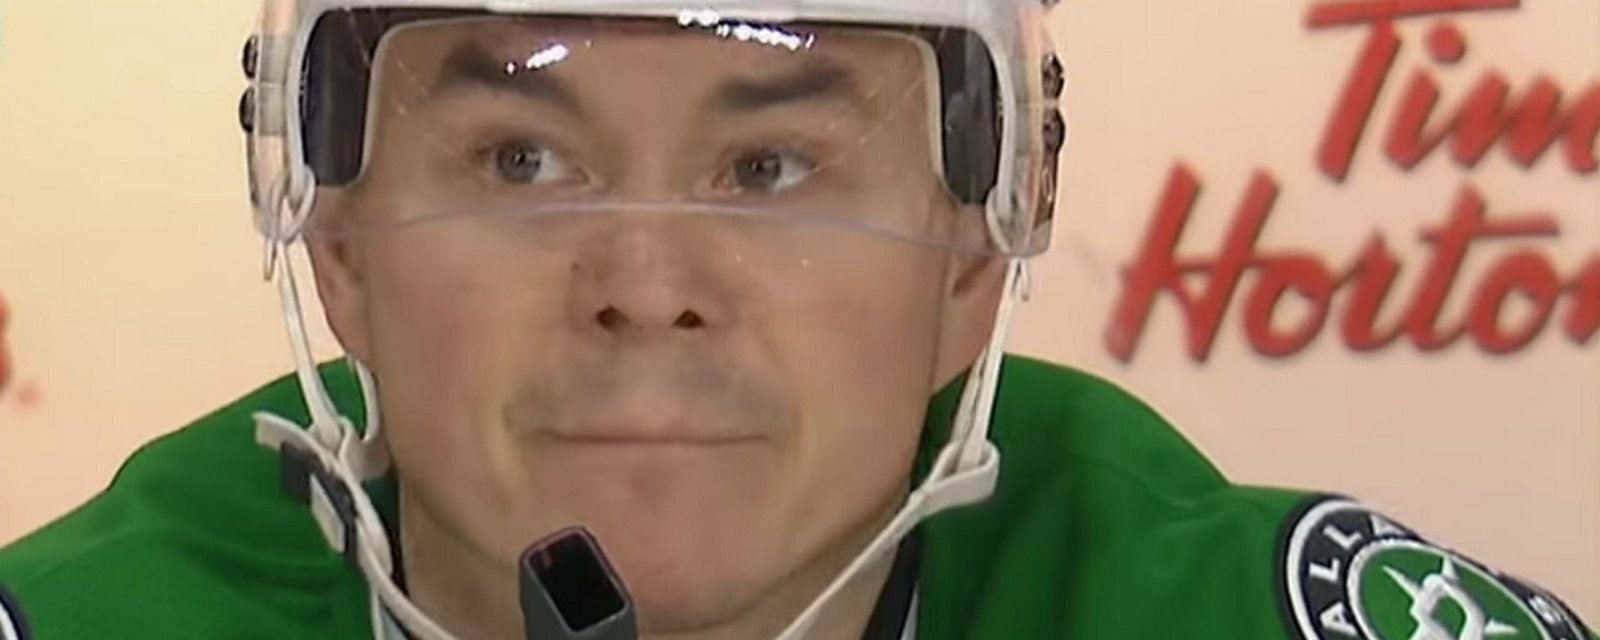 Watch: Stars score on themselves in the 1st period for one of the worst own-goals ever.